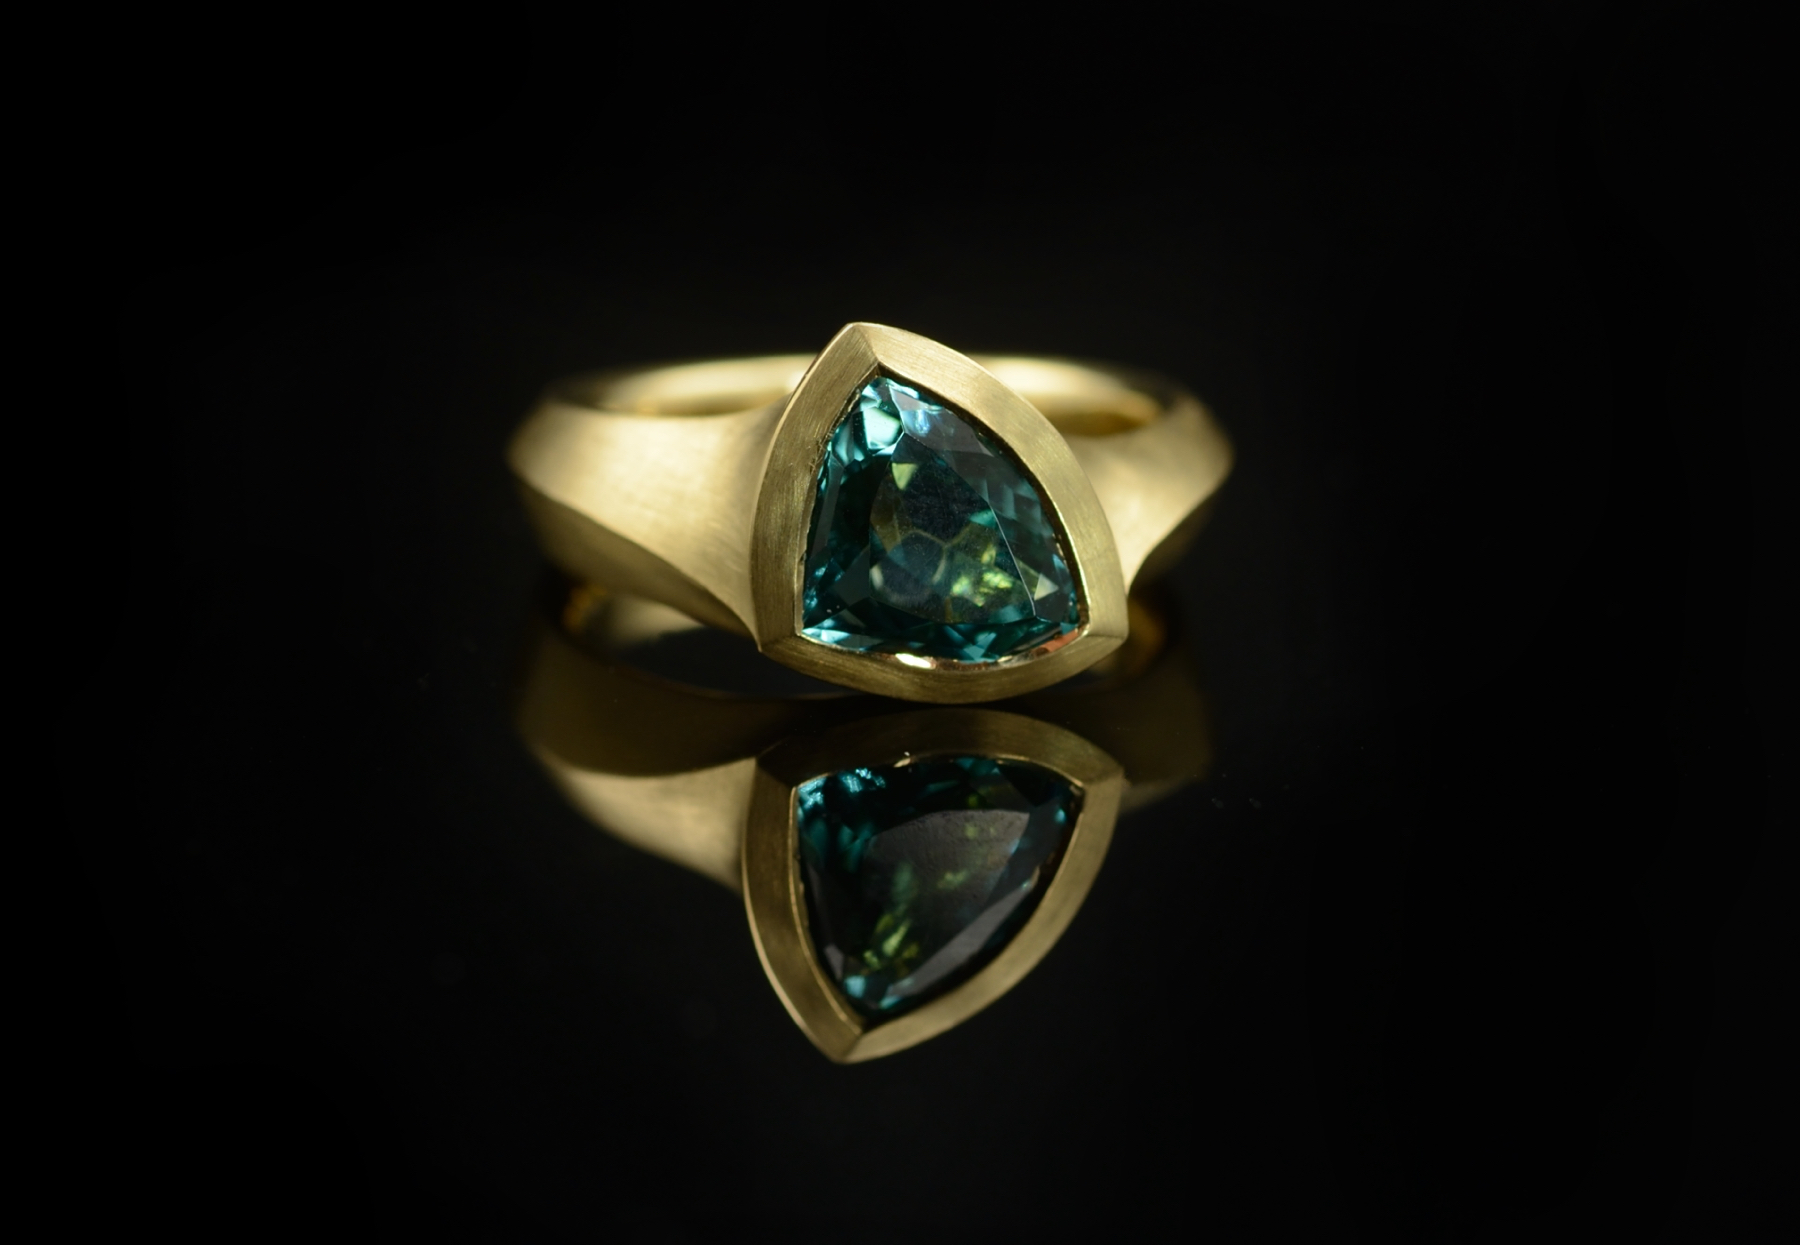 Hand carved yellow gold and trilliant tourmaline engagement ring